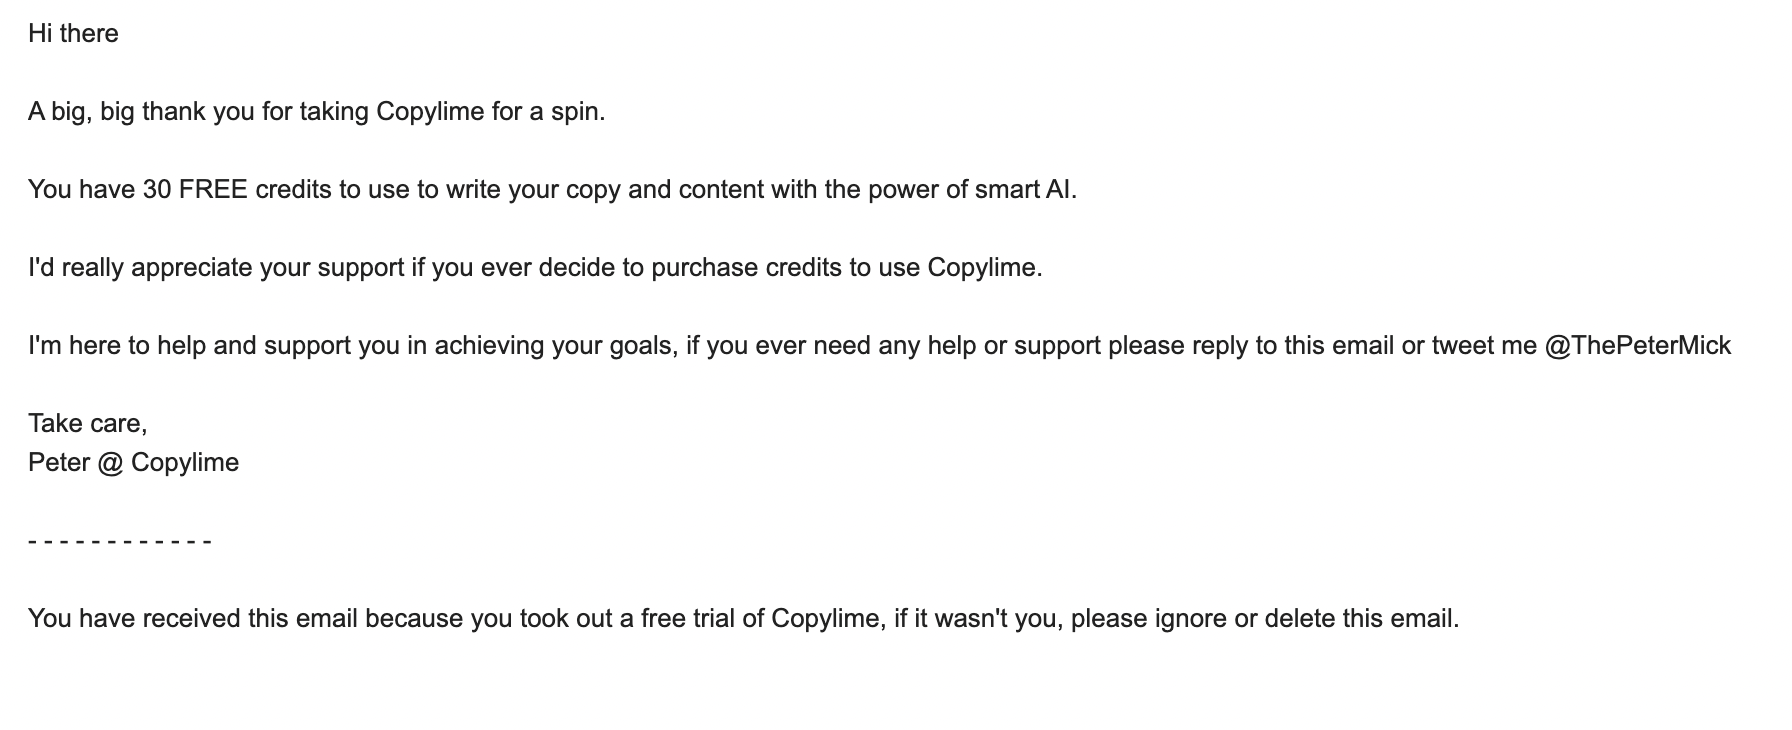 SaaS Plain Text Emails: Screenshot of Copylime's plain text email